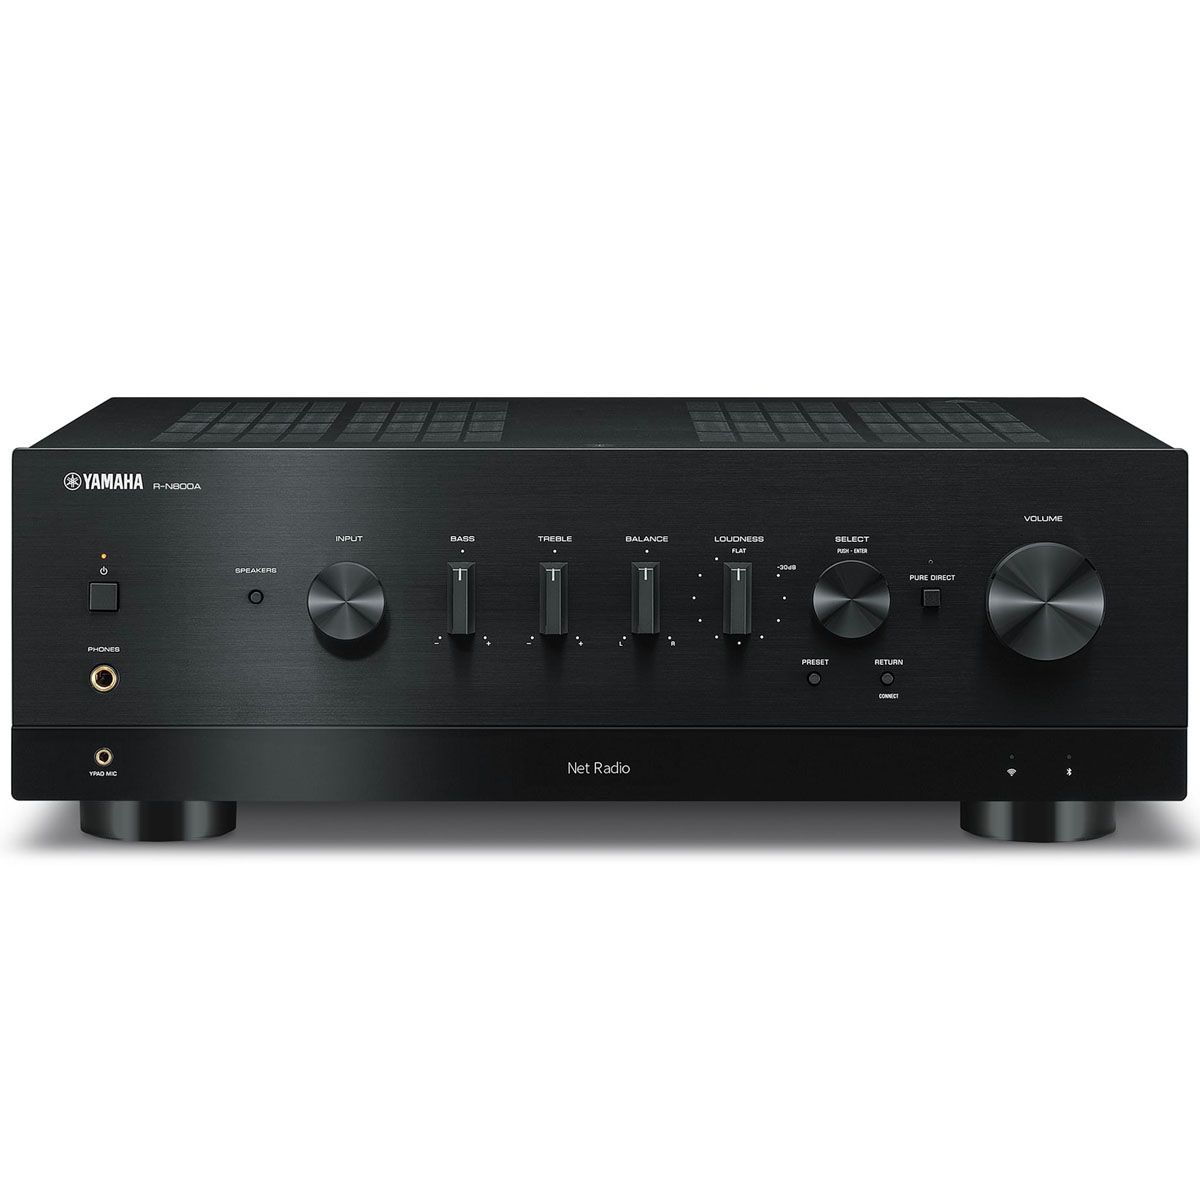 Yamaha R-N800A Network Stereo Receiver - Black front view